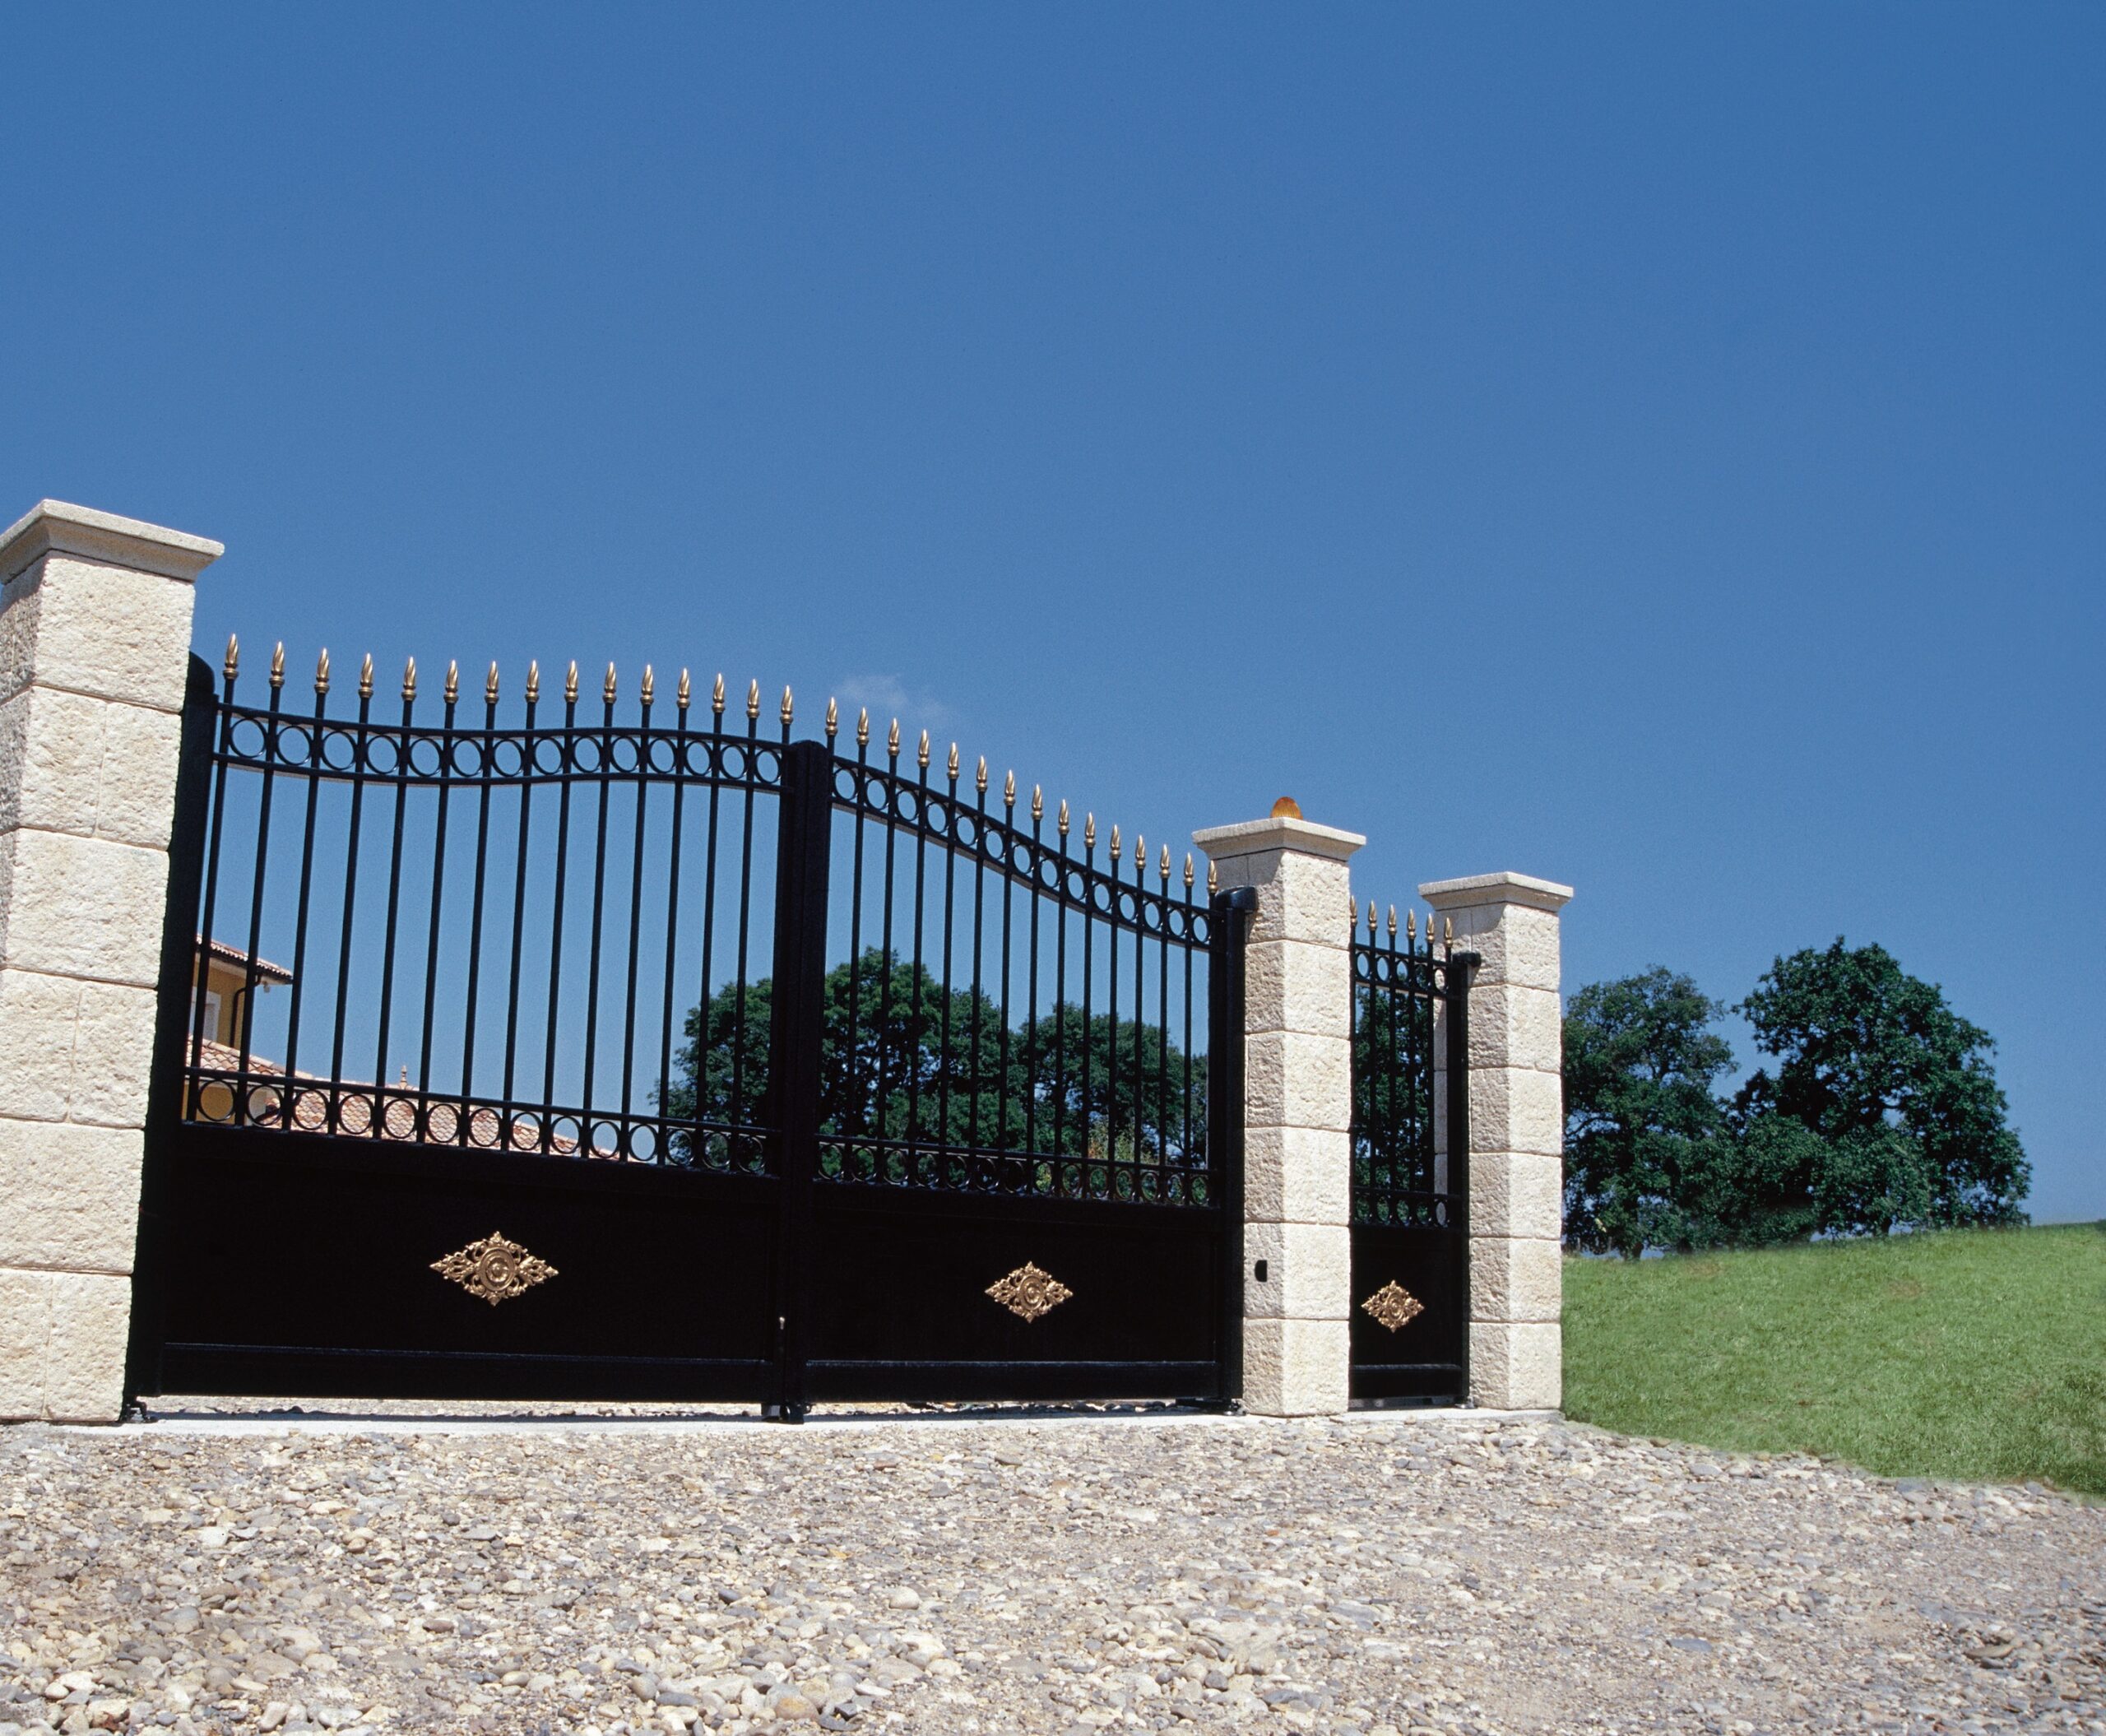 Black and gold sunny wrought iron replica aluminium gates with swing gates and pedestrian gate fixed to white pillars